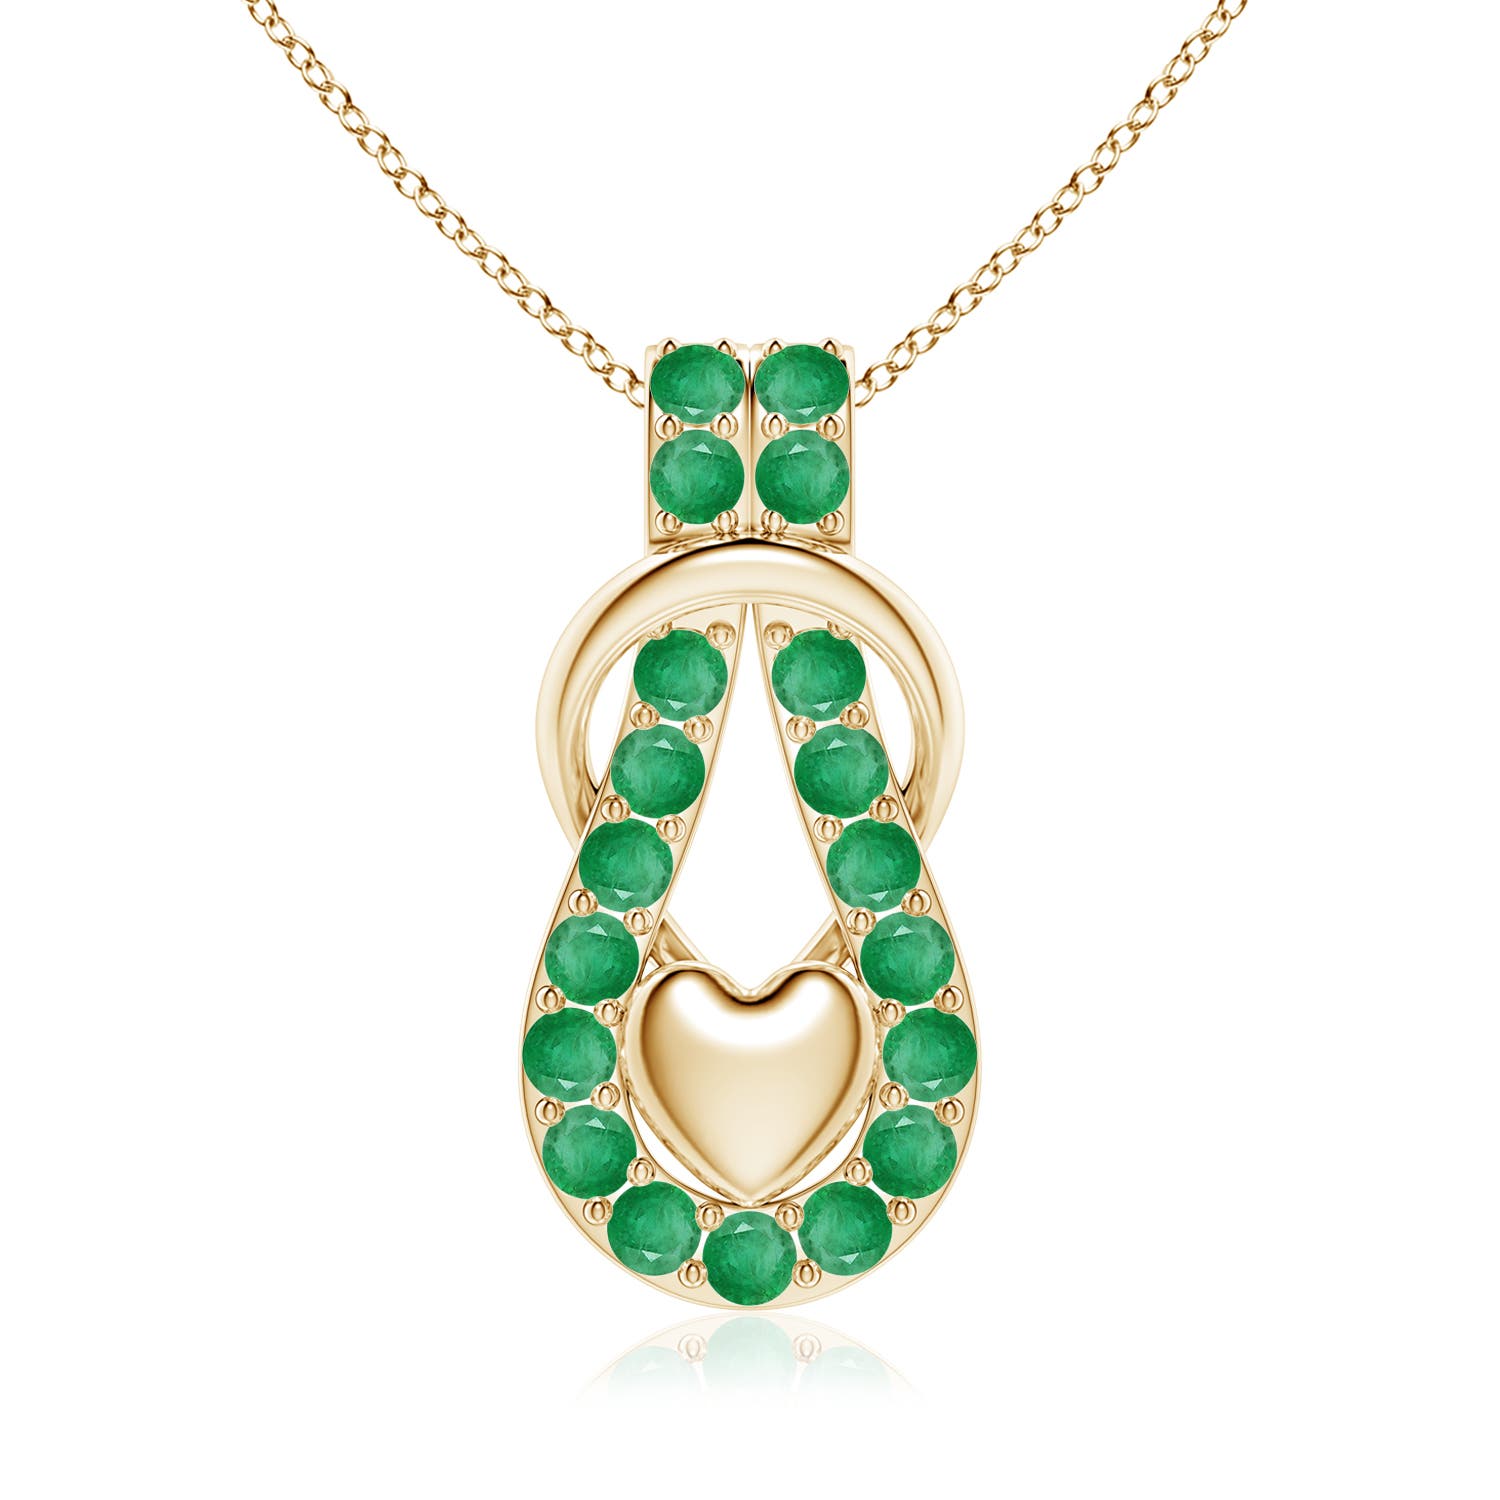 A - Emerald / 2.85 CT / 14 KT Yellow Gold